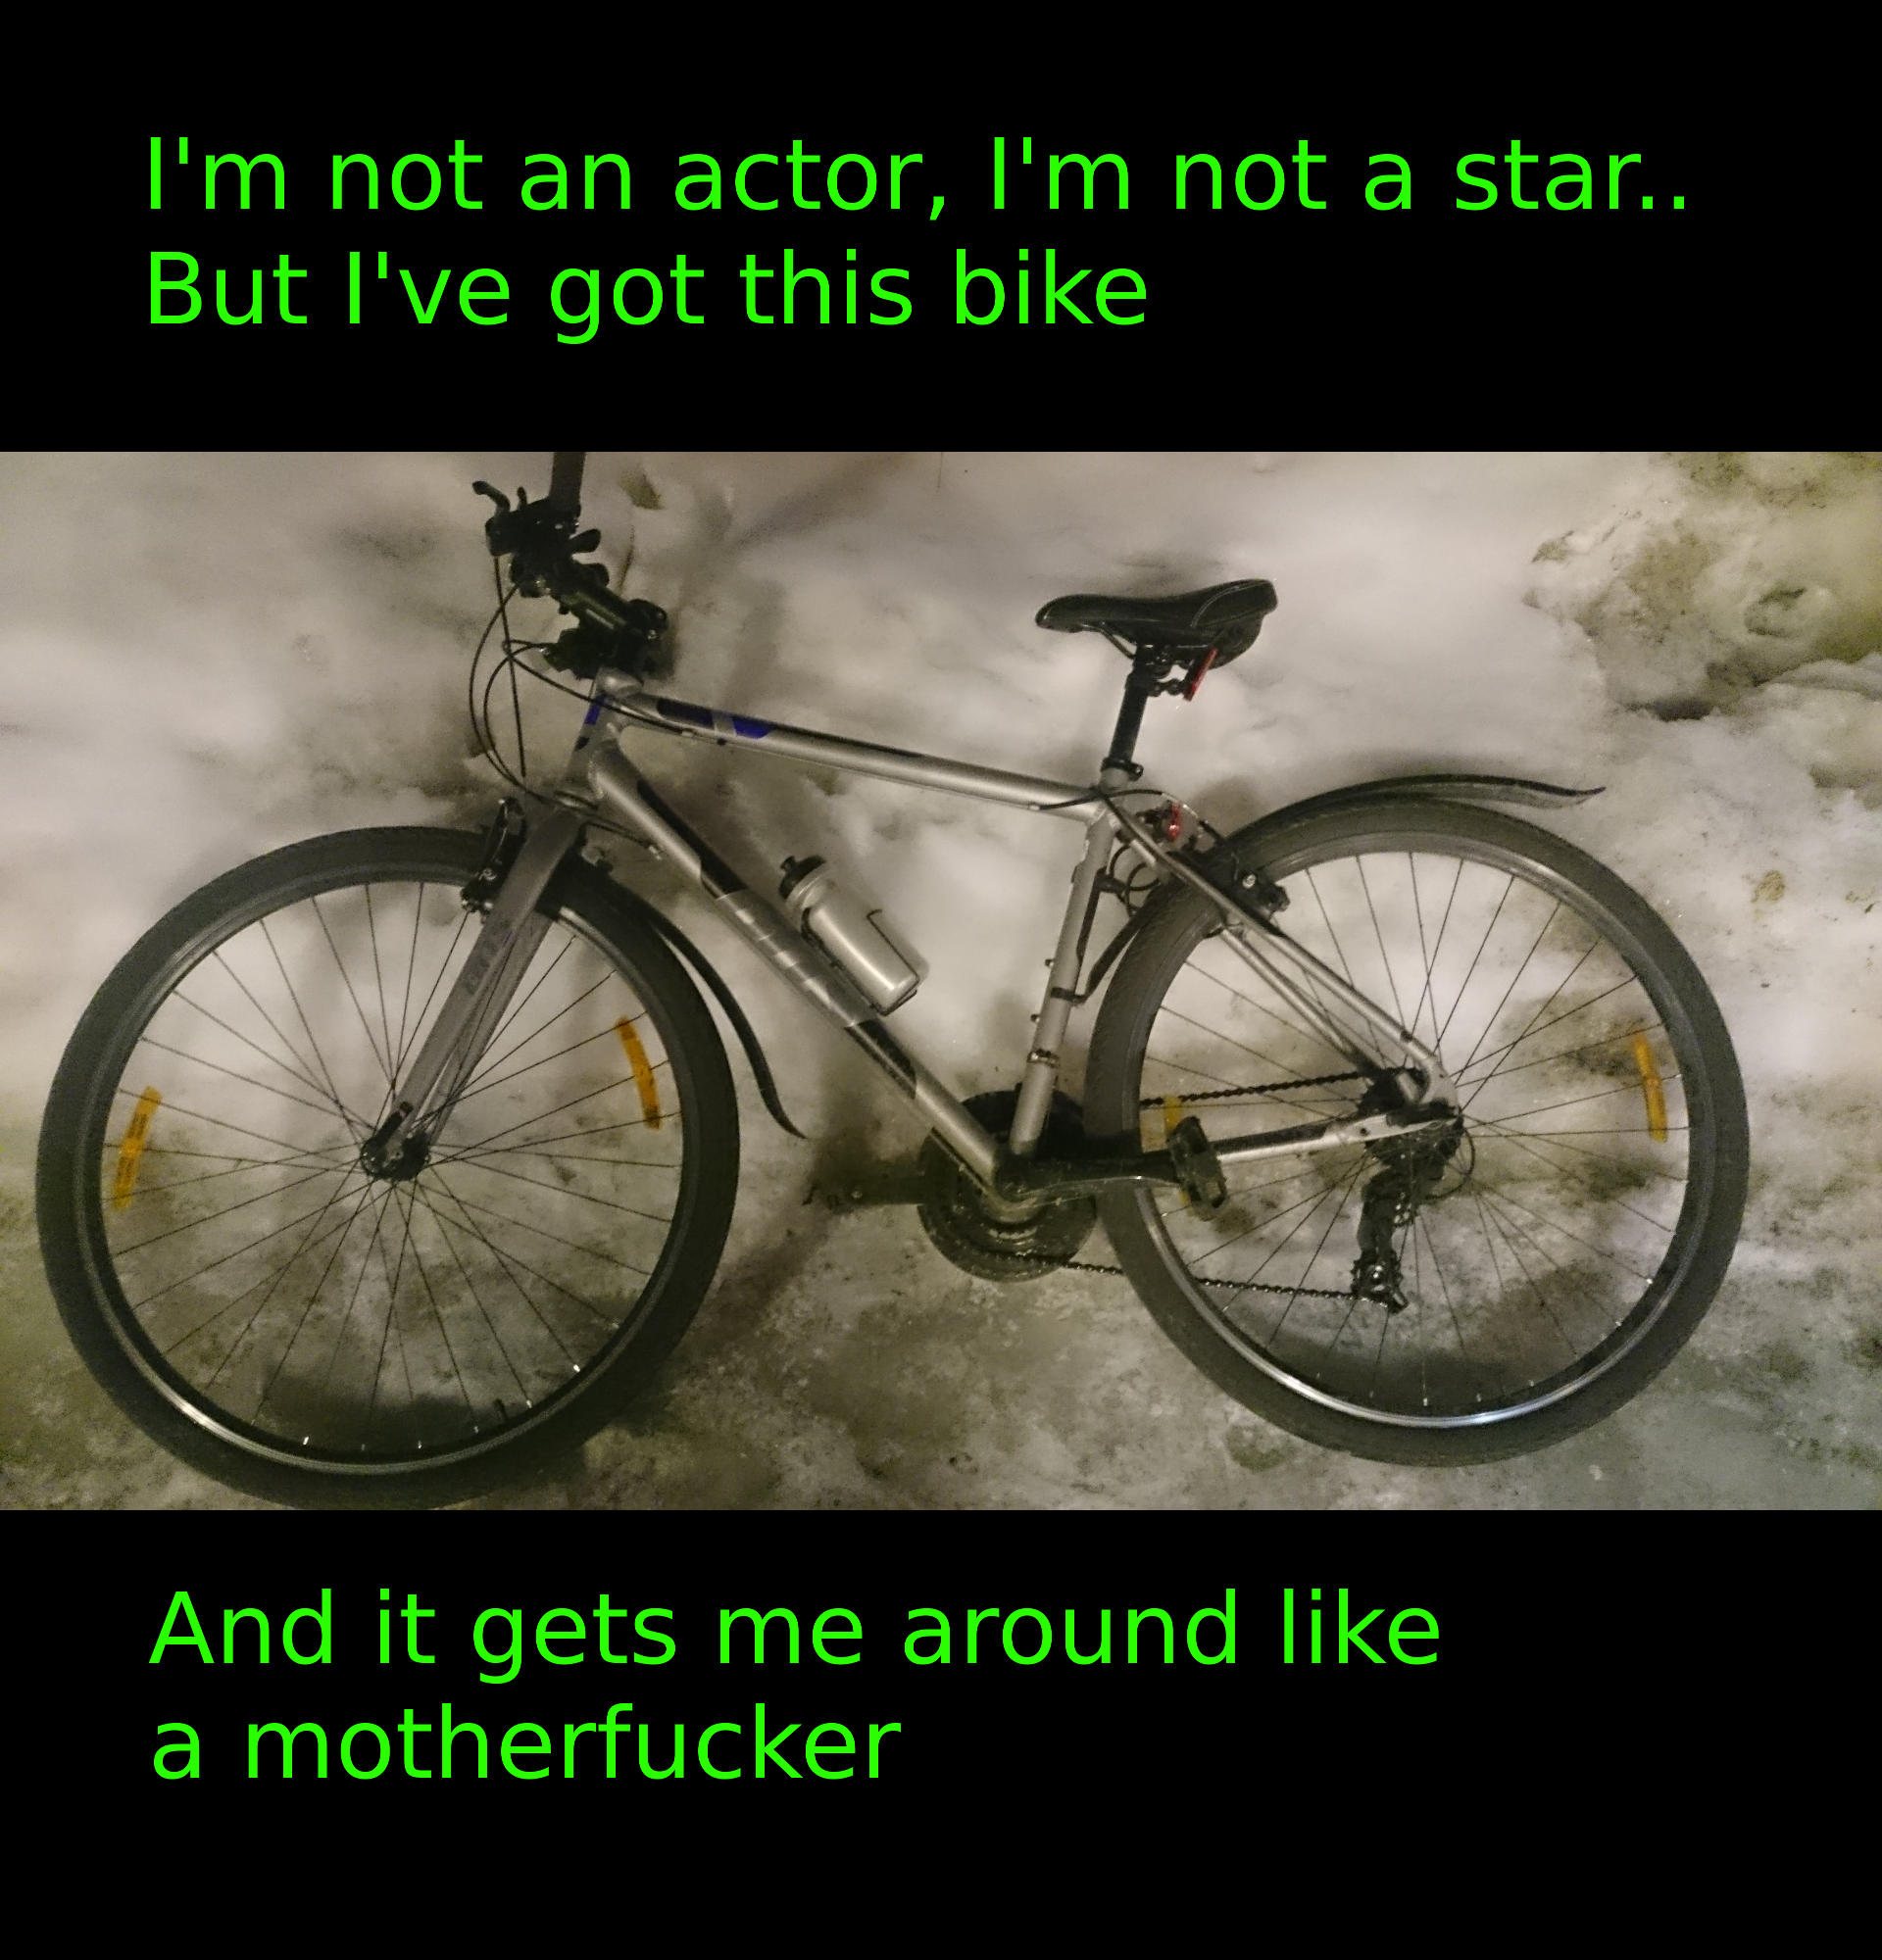 Picture of bike, with text I'm not an actor, I'm not a star, but I've got this bike and it gets me around like a motherfucker